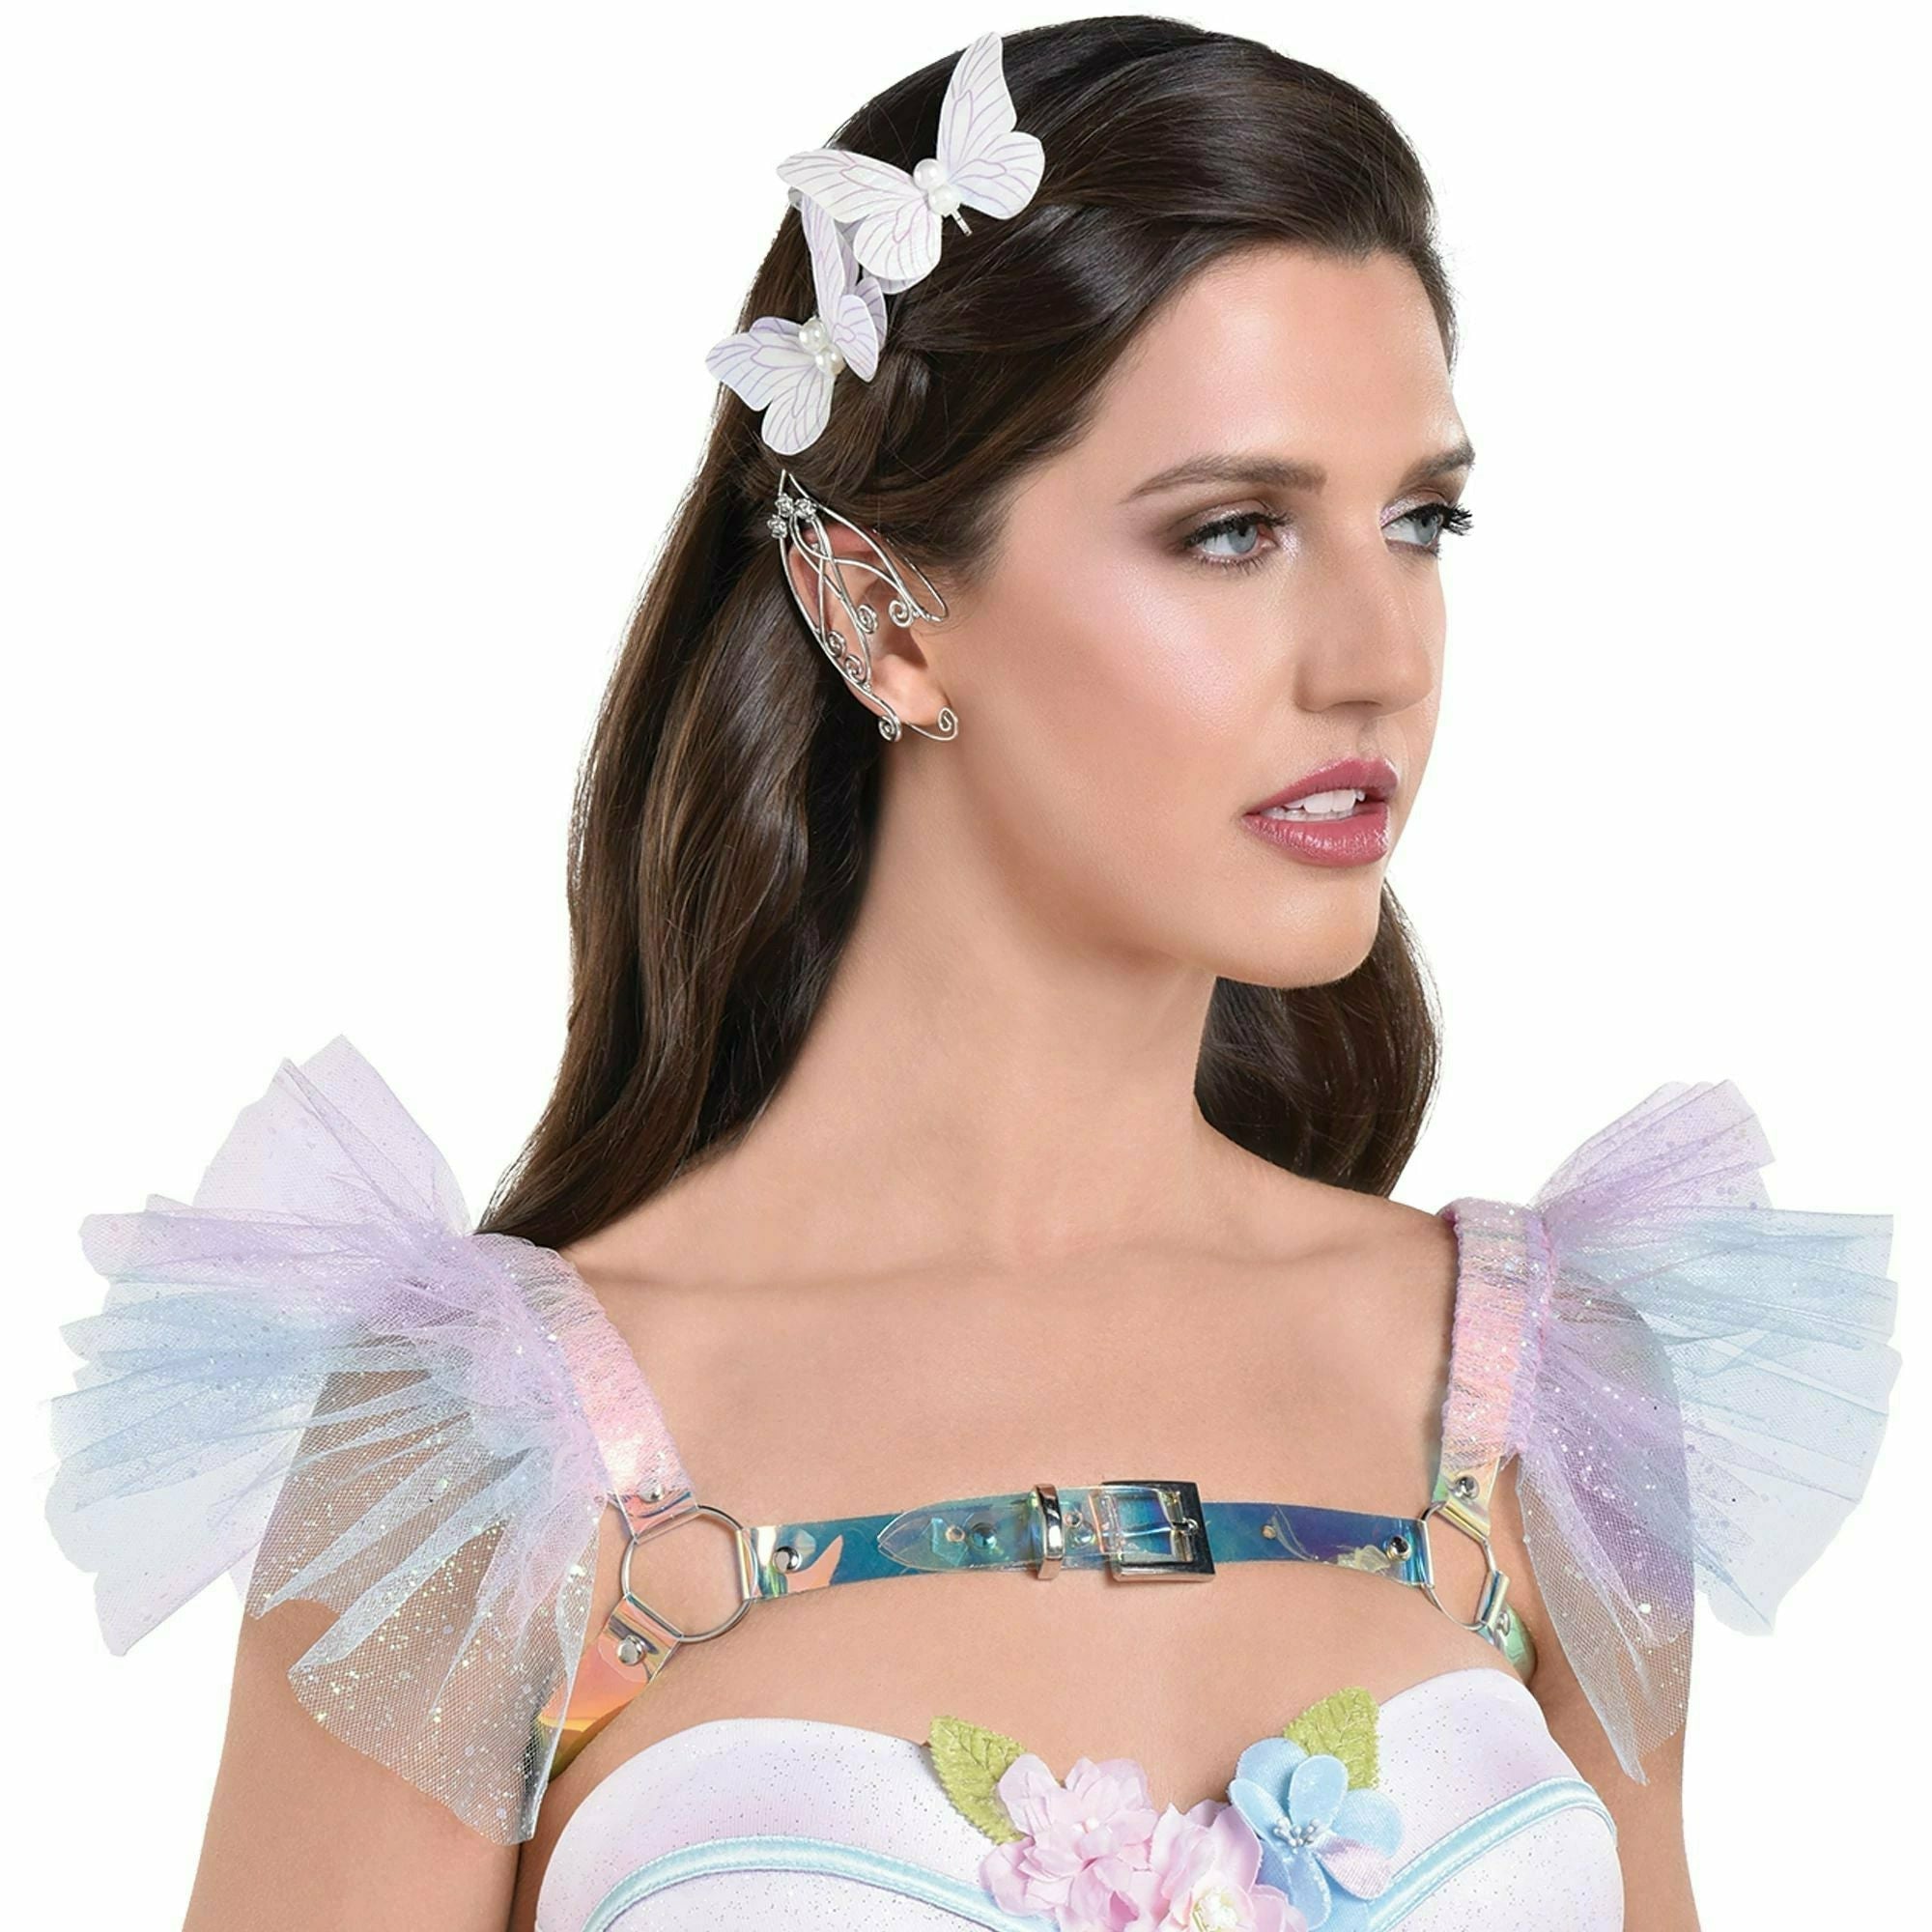 Amscan COSTUMES: ACCESSORIES Fairy Harness